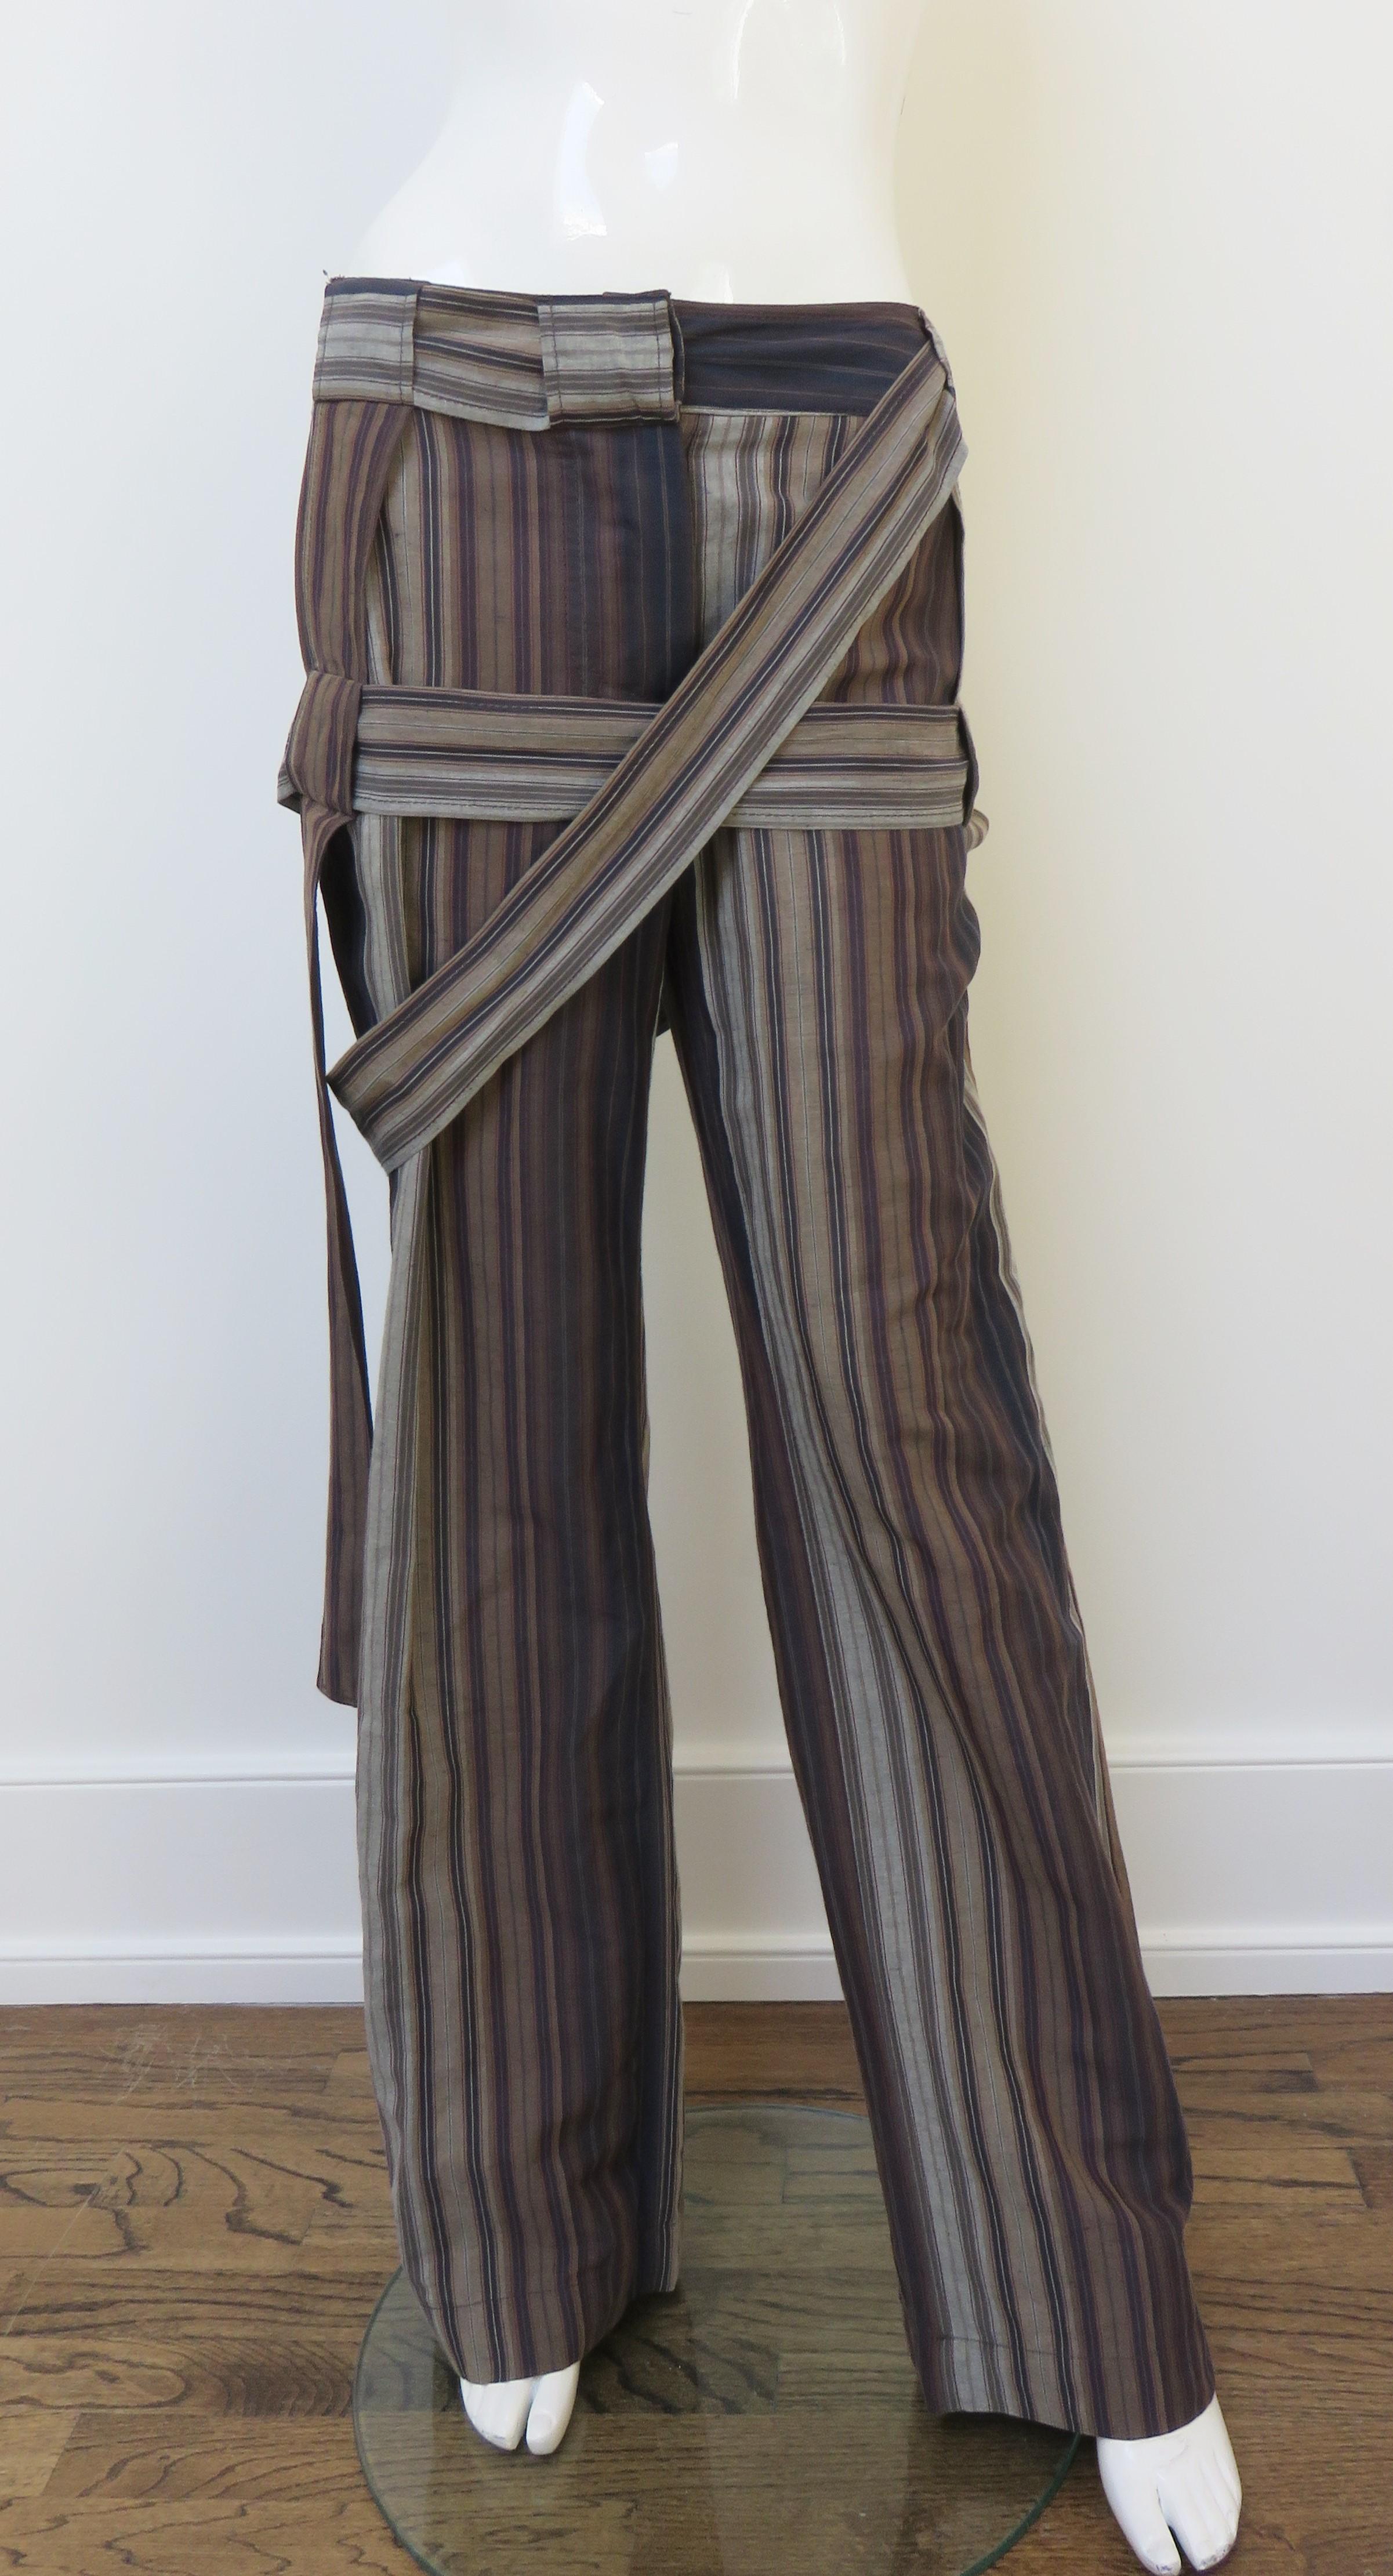 A fabulous pair of linen cotton blend pant from the late, great Vivienne Westwood in brown, grey, and black variegated vertical stripes. They are mid rise with a waistband, front button fly, back patch pocket, side seam pockets and straight legs. A